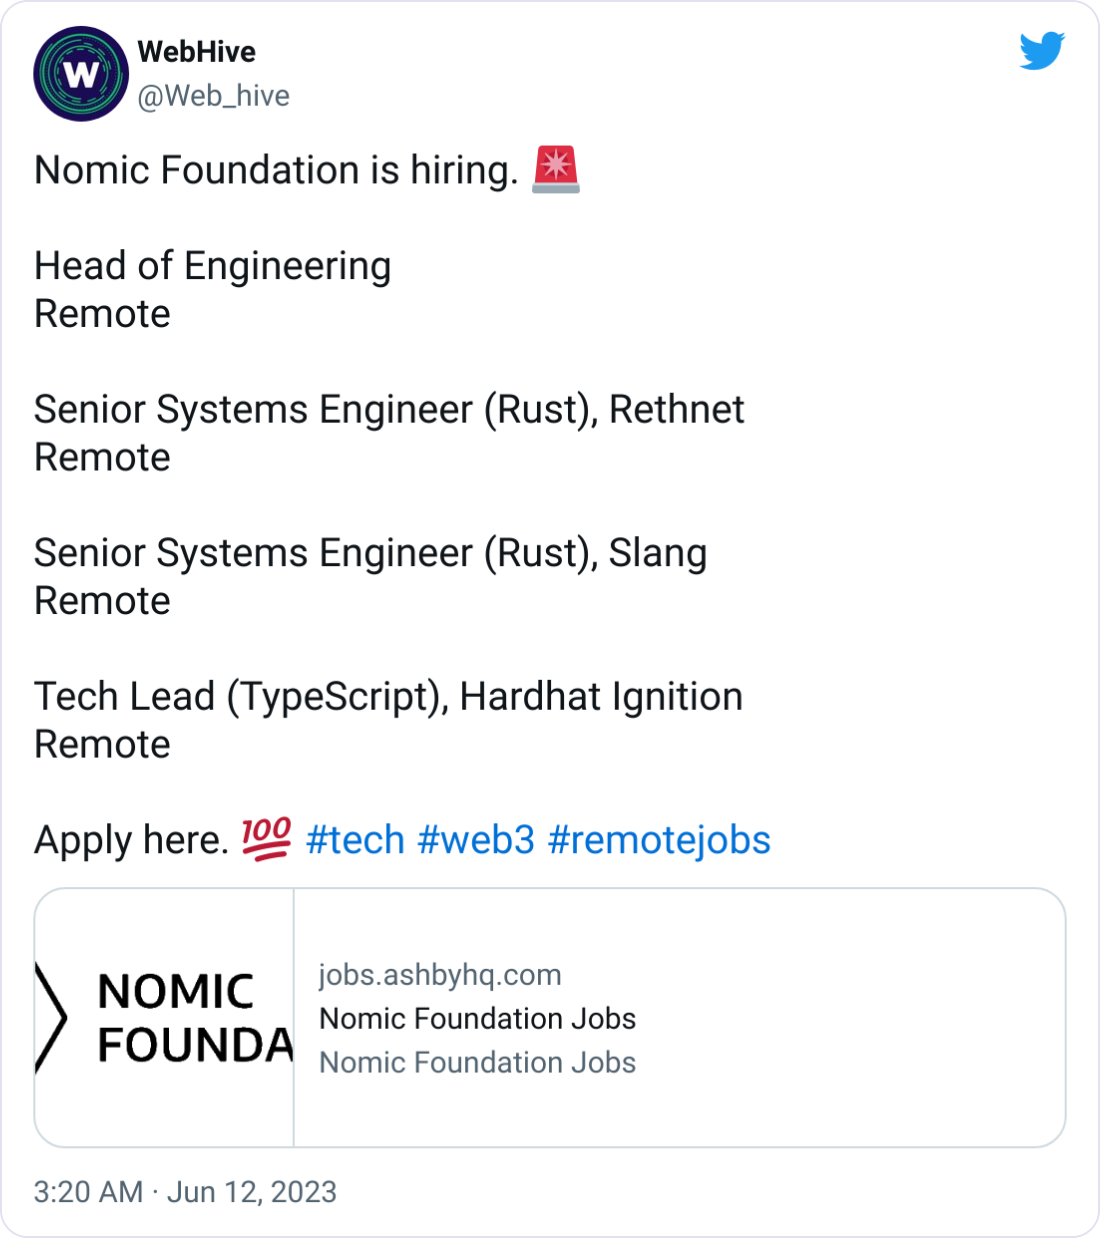  WebHive @Web_hive Nomic Foundation is hiring. 🚨  Head of Engineering Remote  Senior Systems Engineer (Rust), Rethnet Remote  Senior Systems Engineer (Rust), Slang Remote  Tech Lead (TypeScript), Hardhat Ignition Remote  Apply here. 💯 #tech #web3 #remotejobs